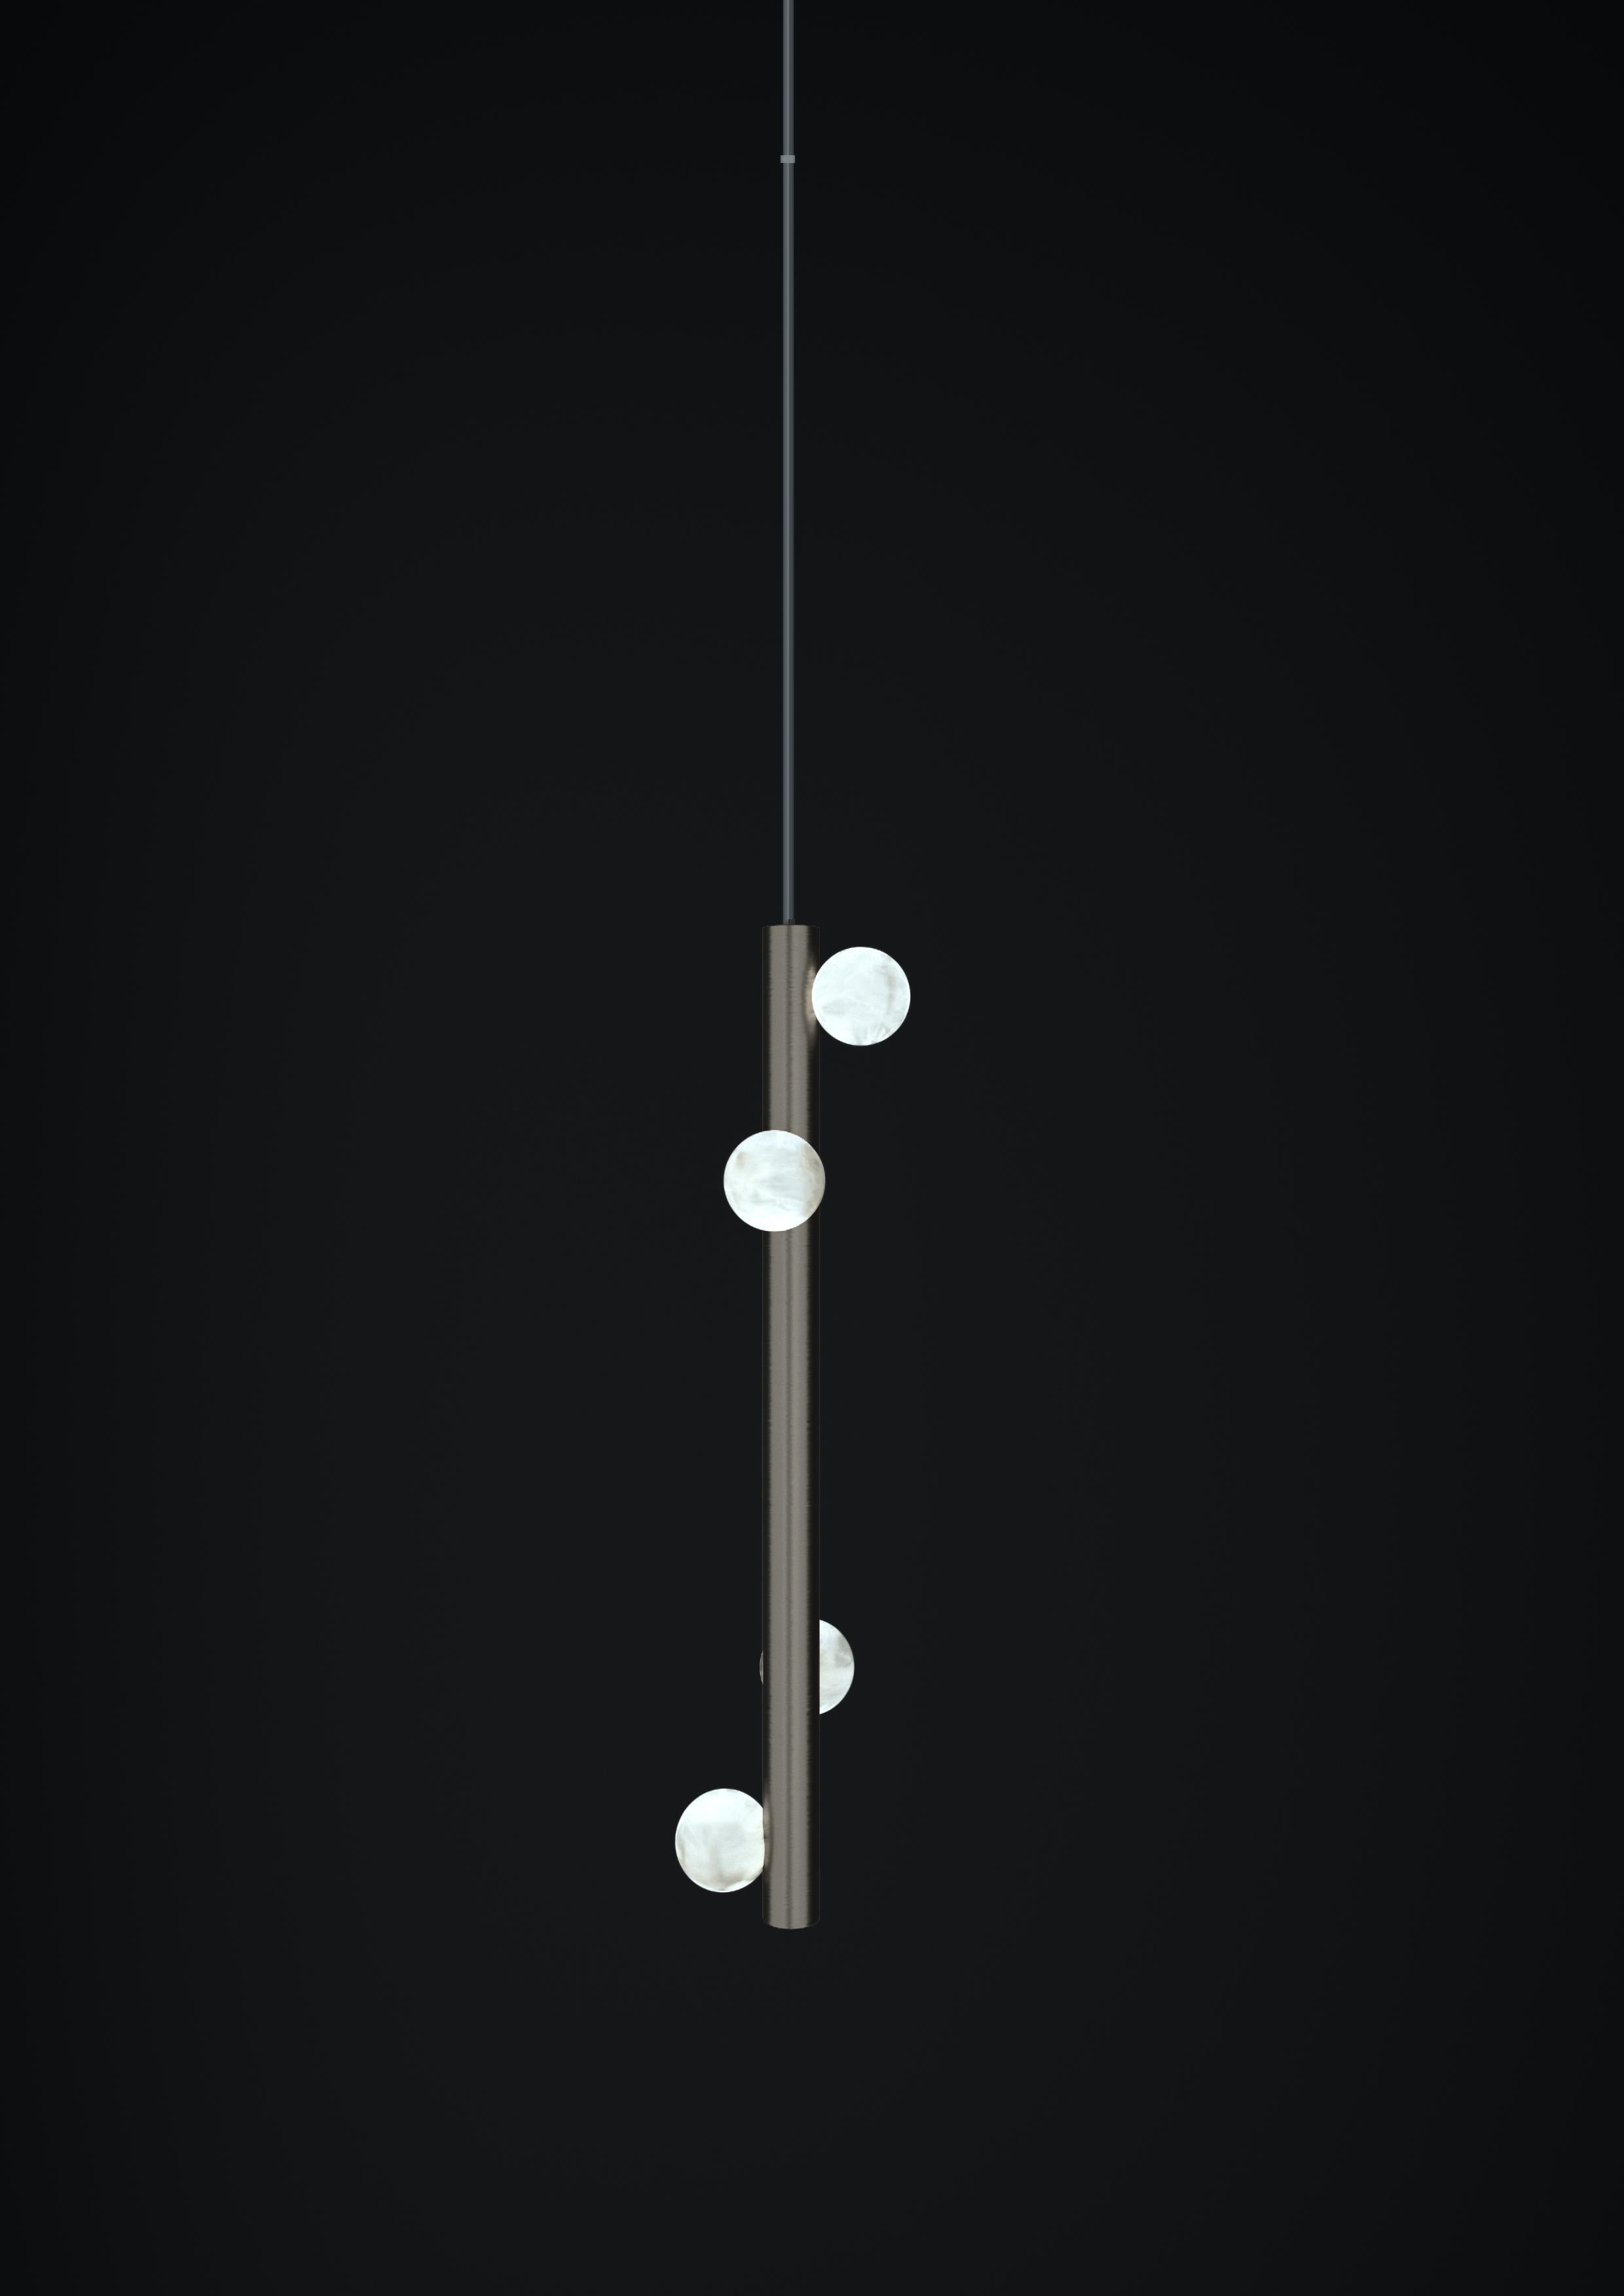 Demetra Brushed Black Metal Pendant Lamp 2 by Alabastro Italiano
Dimensions: D 12 x W 12 x H 60 cm.
Materials: White alabaster and metal.

Available in different finishes: Shiny Silver, Bronze, Brushed Brass, Ruggine of Florence, Brushed Burnished,